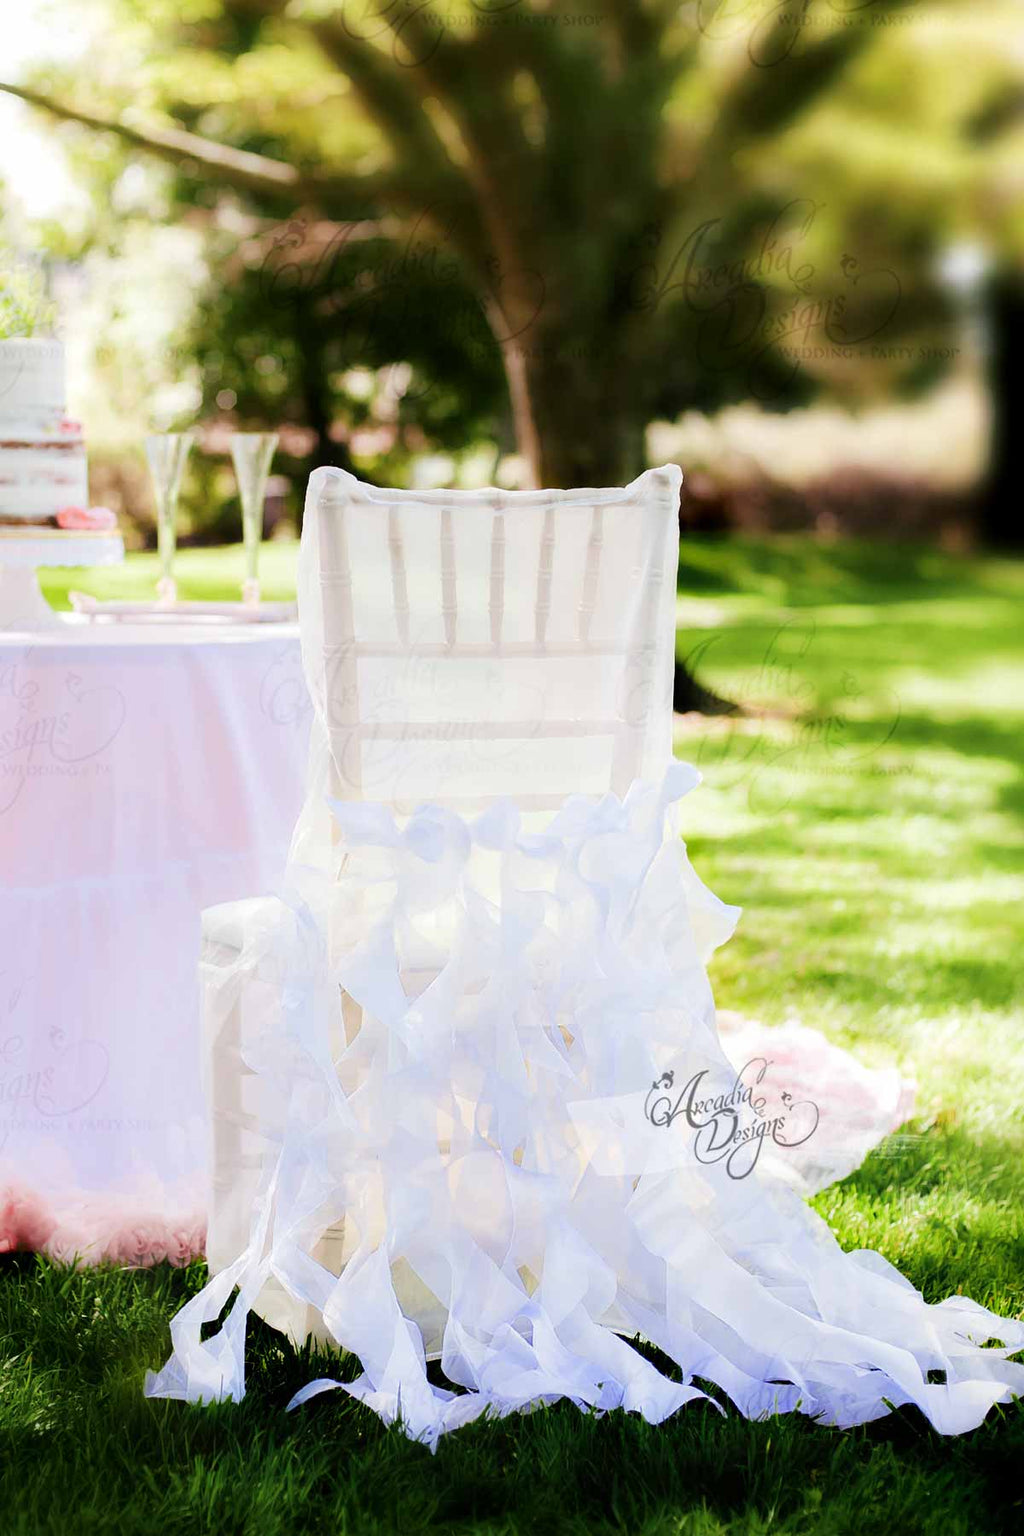 Arcadia Designs Snow White Curly Willow Bridal Chair Cover White